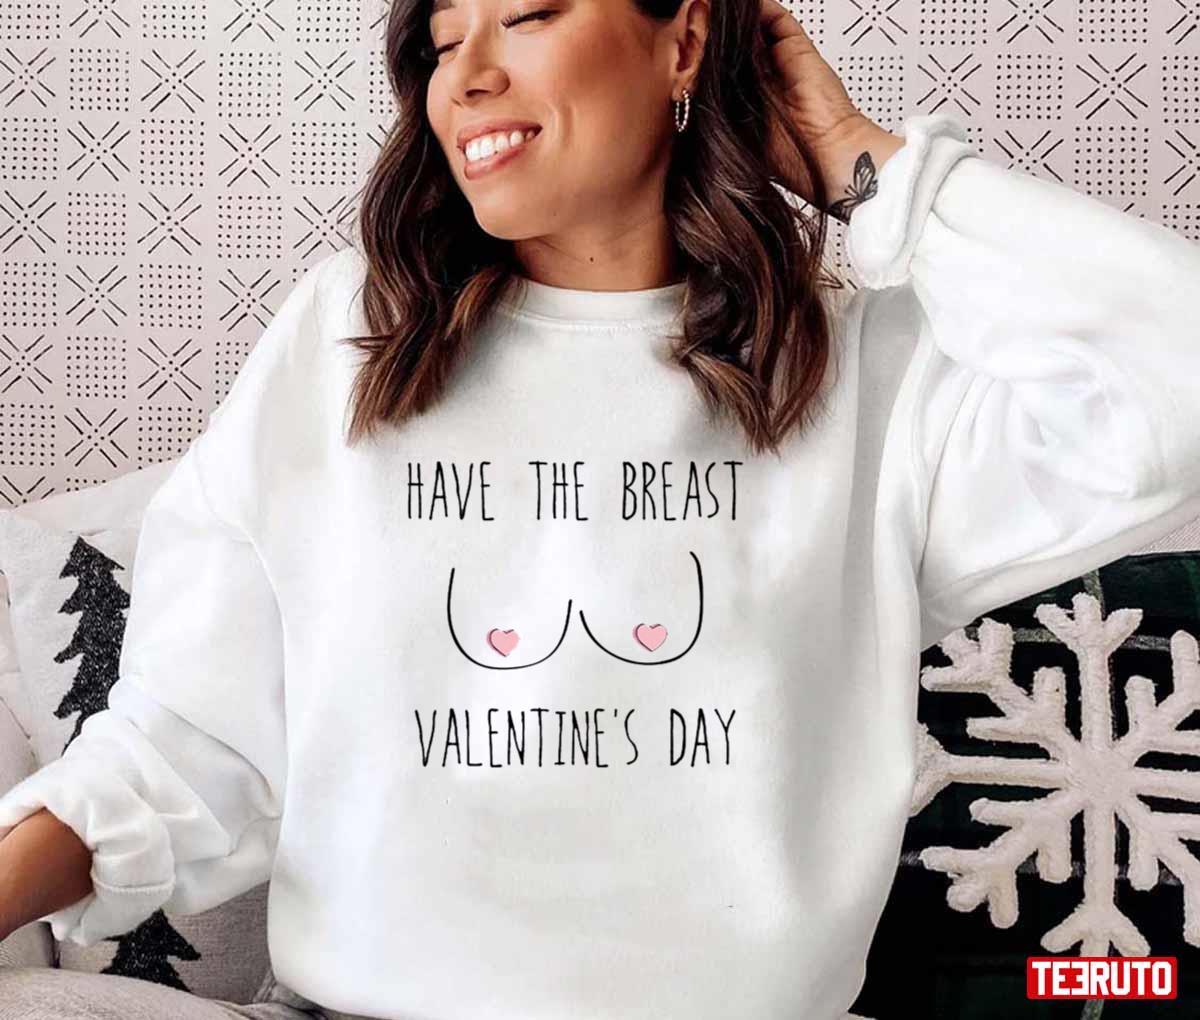 Funny Have The Breast Valentine's Day Candy Tits Unisex Sweatshirt Unisex T-Shirt